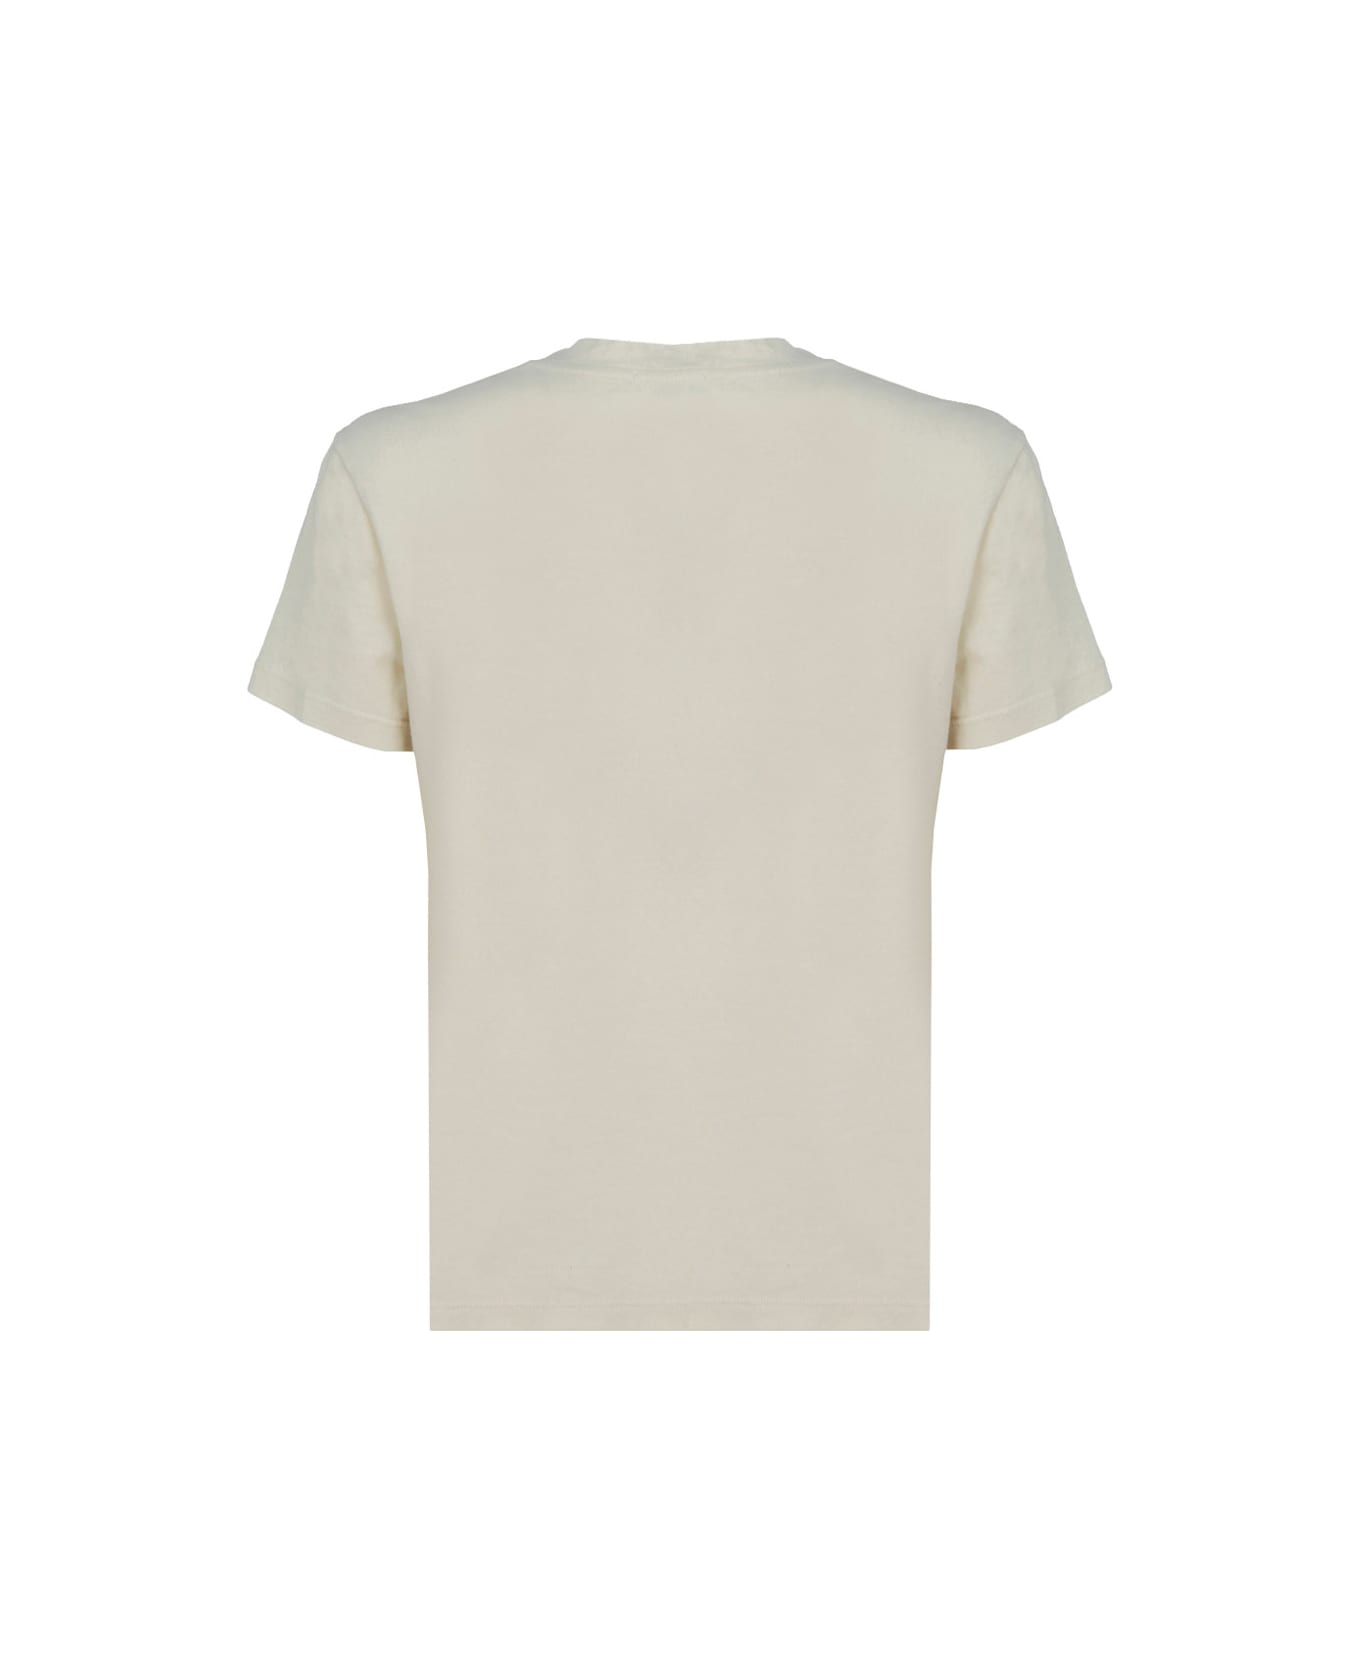 James Perse Vintage T-shirt - Marshmallow Tシャツ